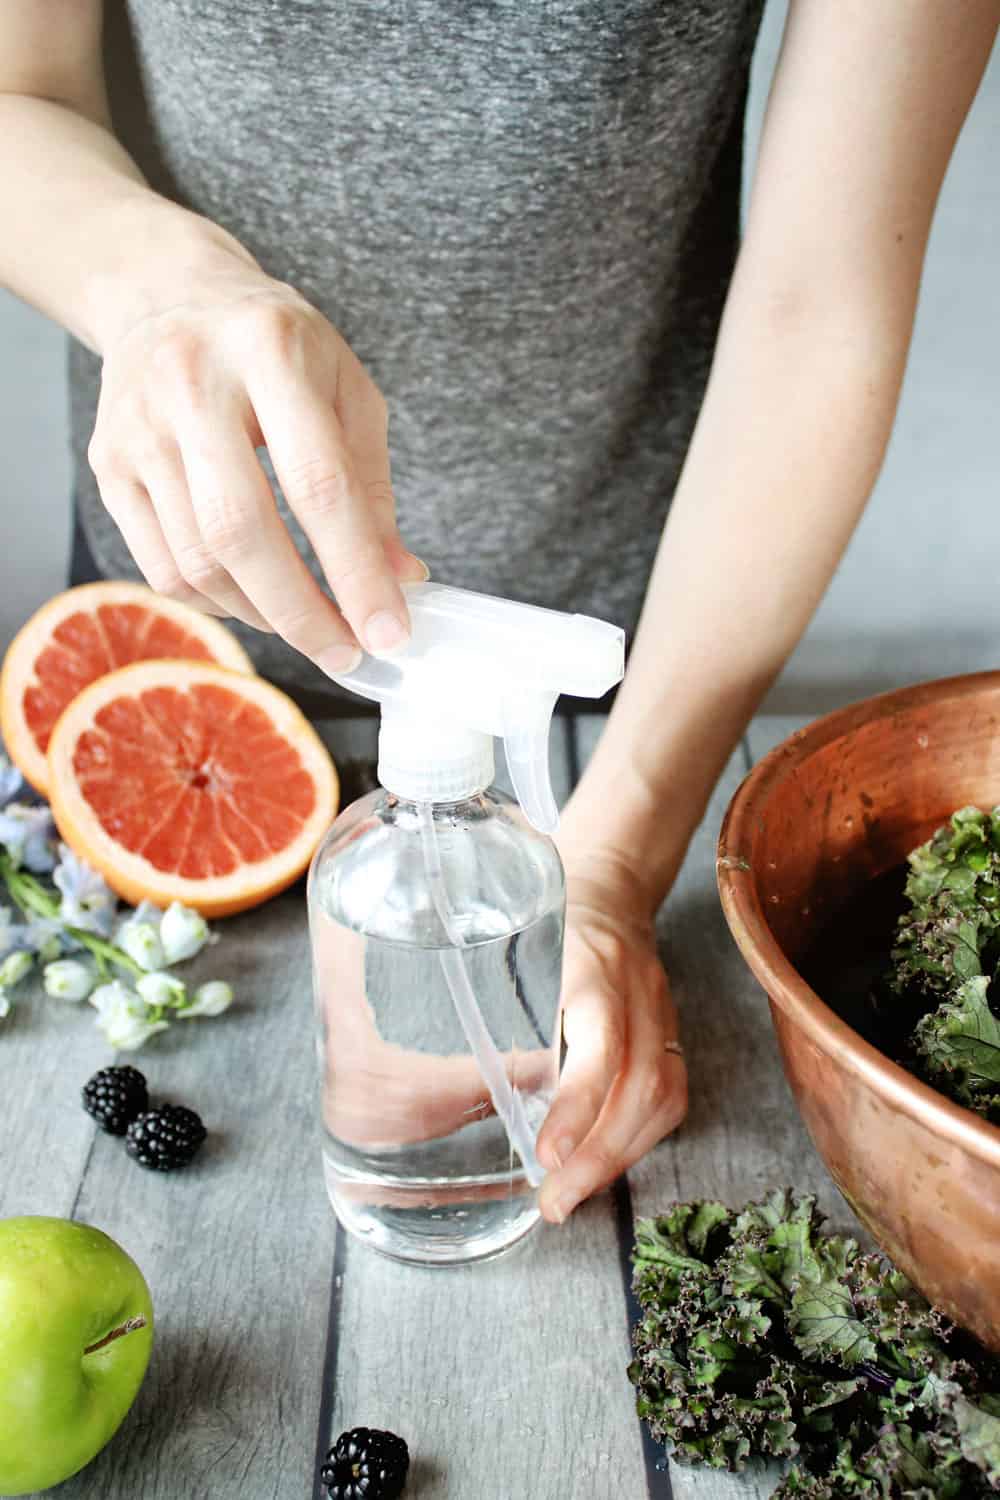 A Simple 4-Ingredient Produce Wash You Can Make at Home